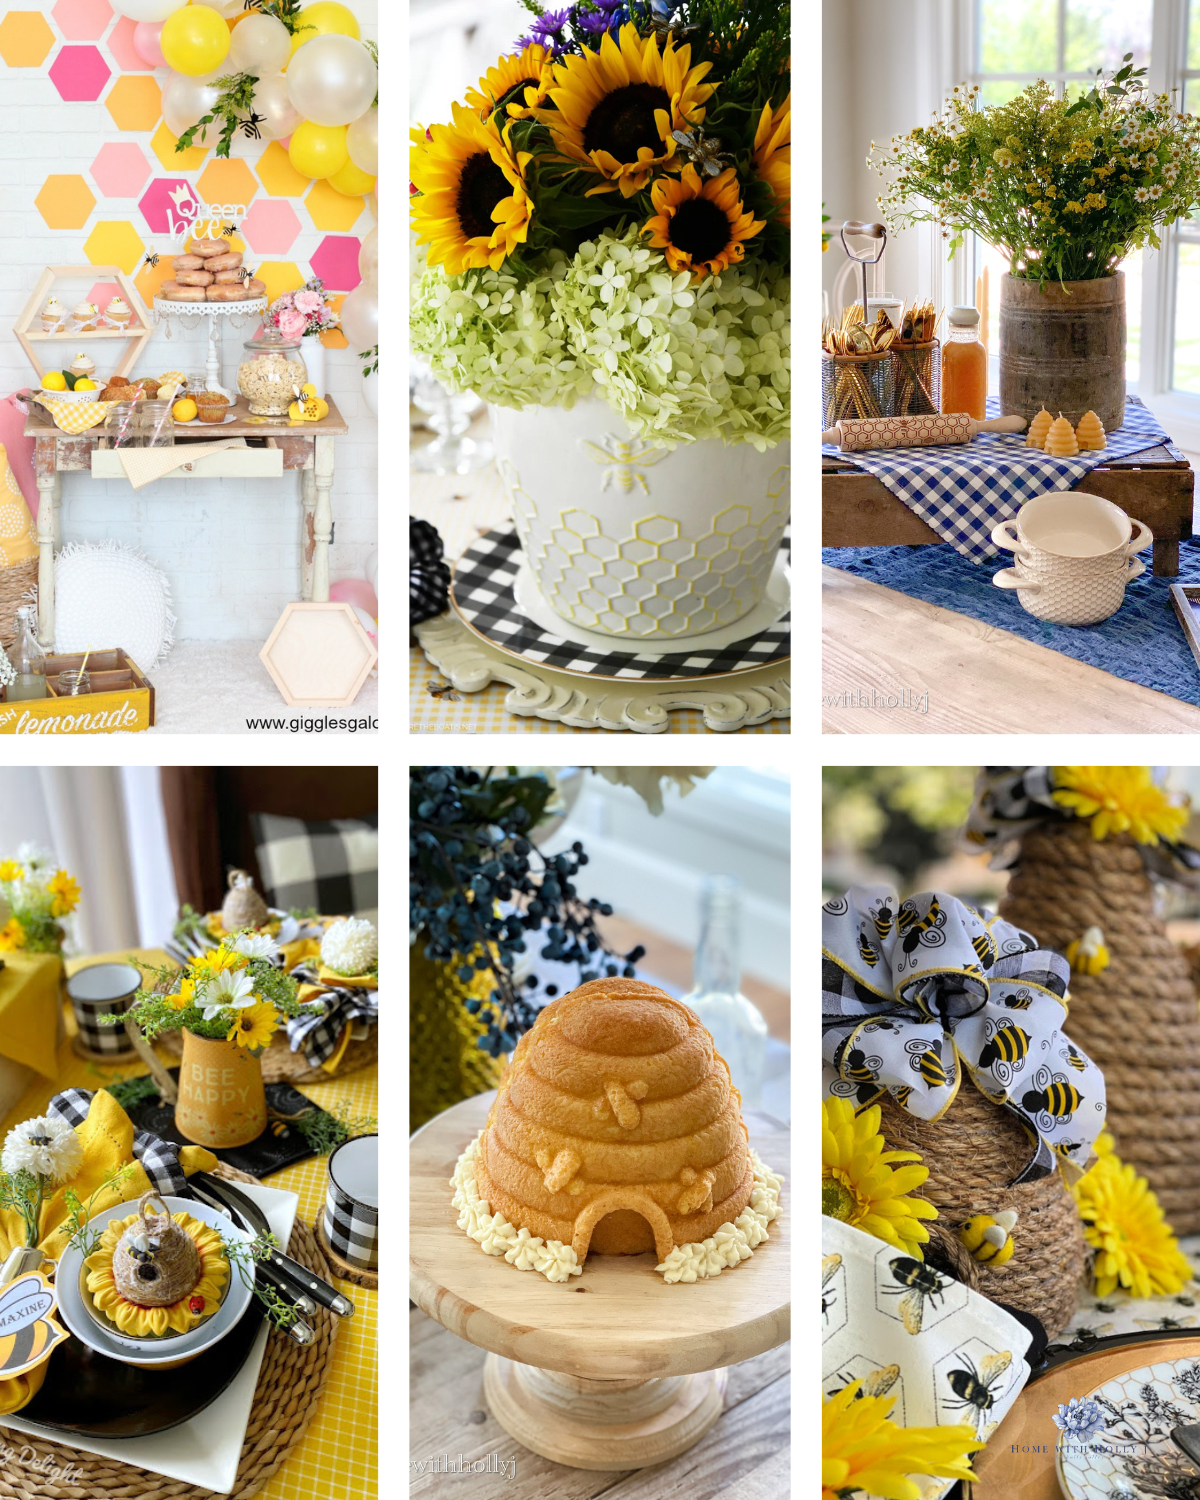 Bee-Themed Decor: Buzzing Ideas for Your Home - Home With Holly J